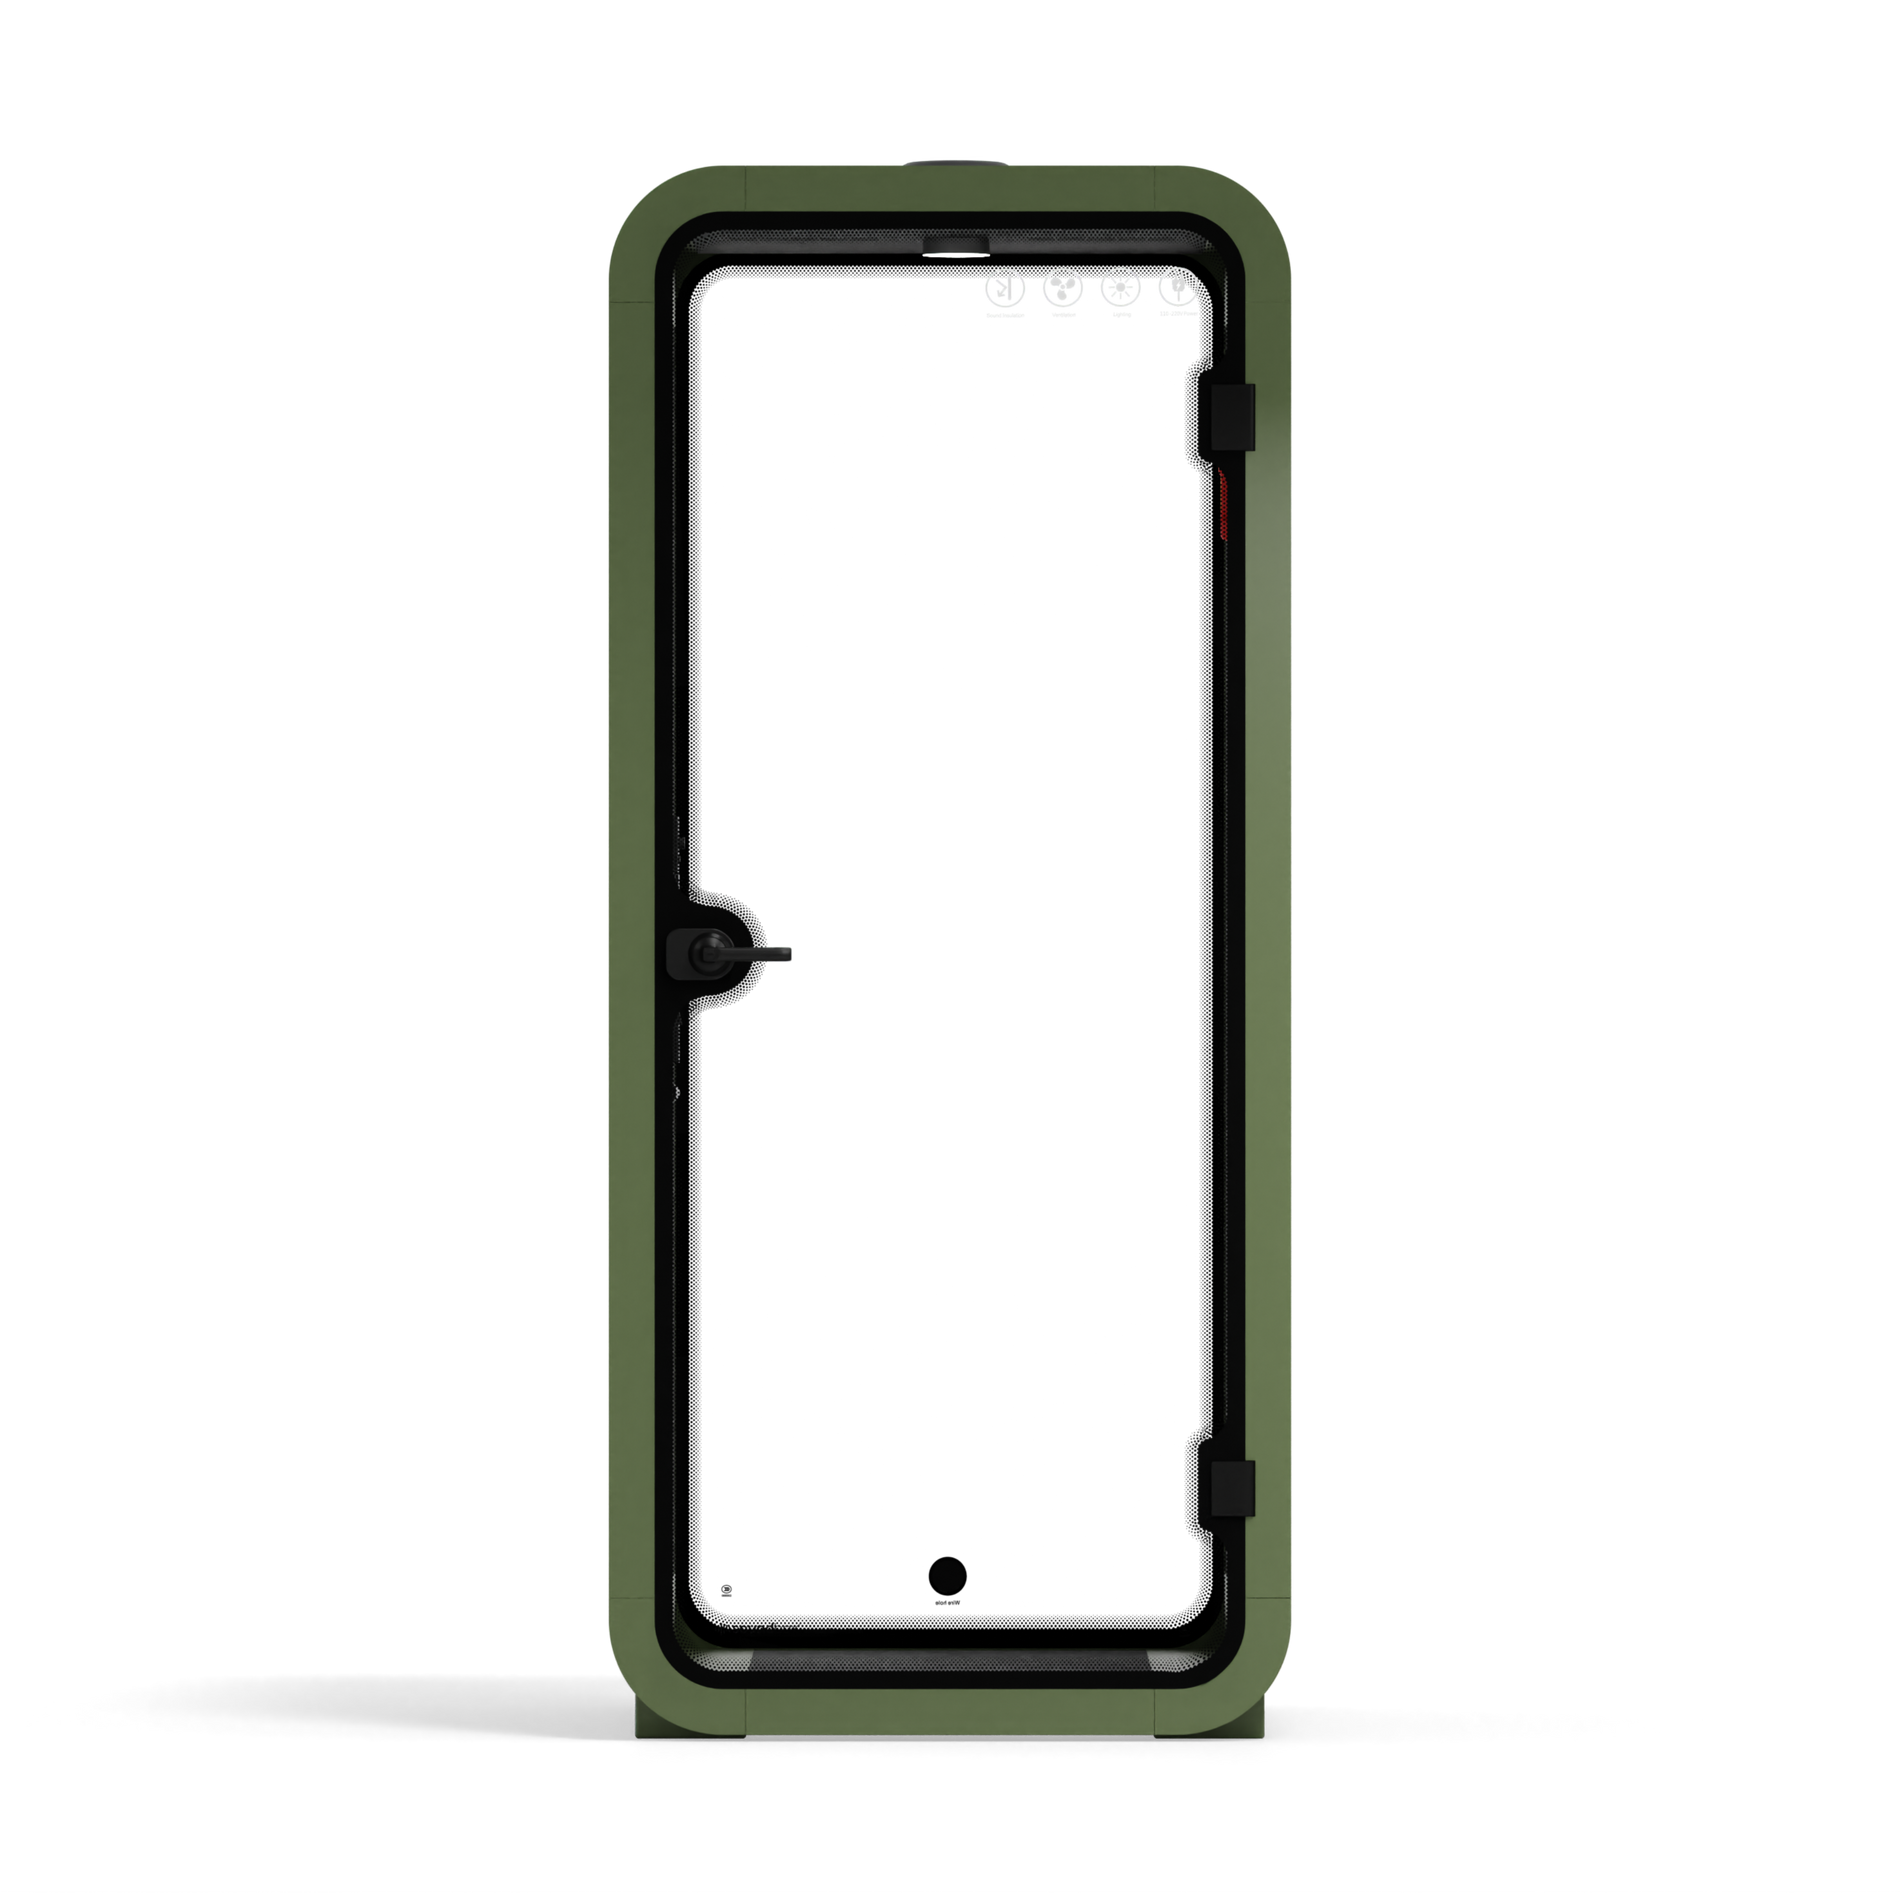 Quell Acoustic Phone BoothGreen / Dark Grey / No Furniture